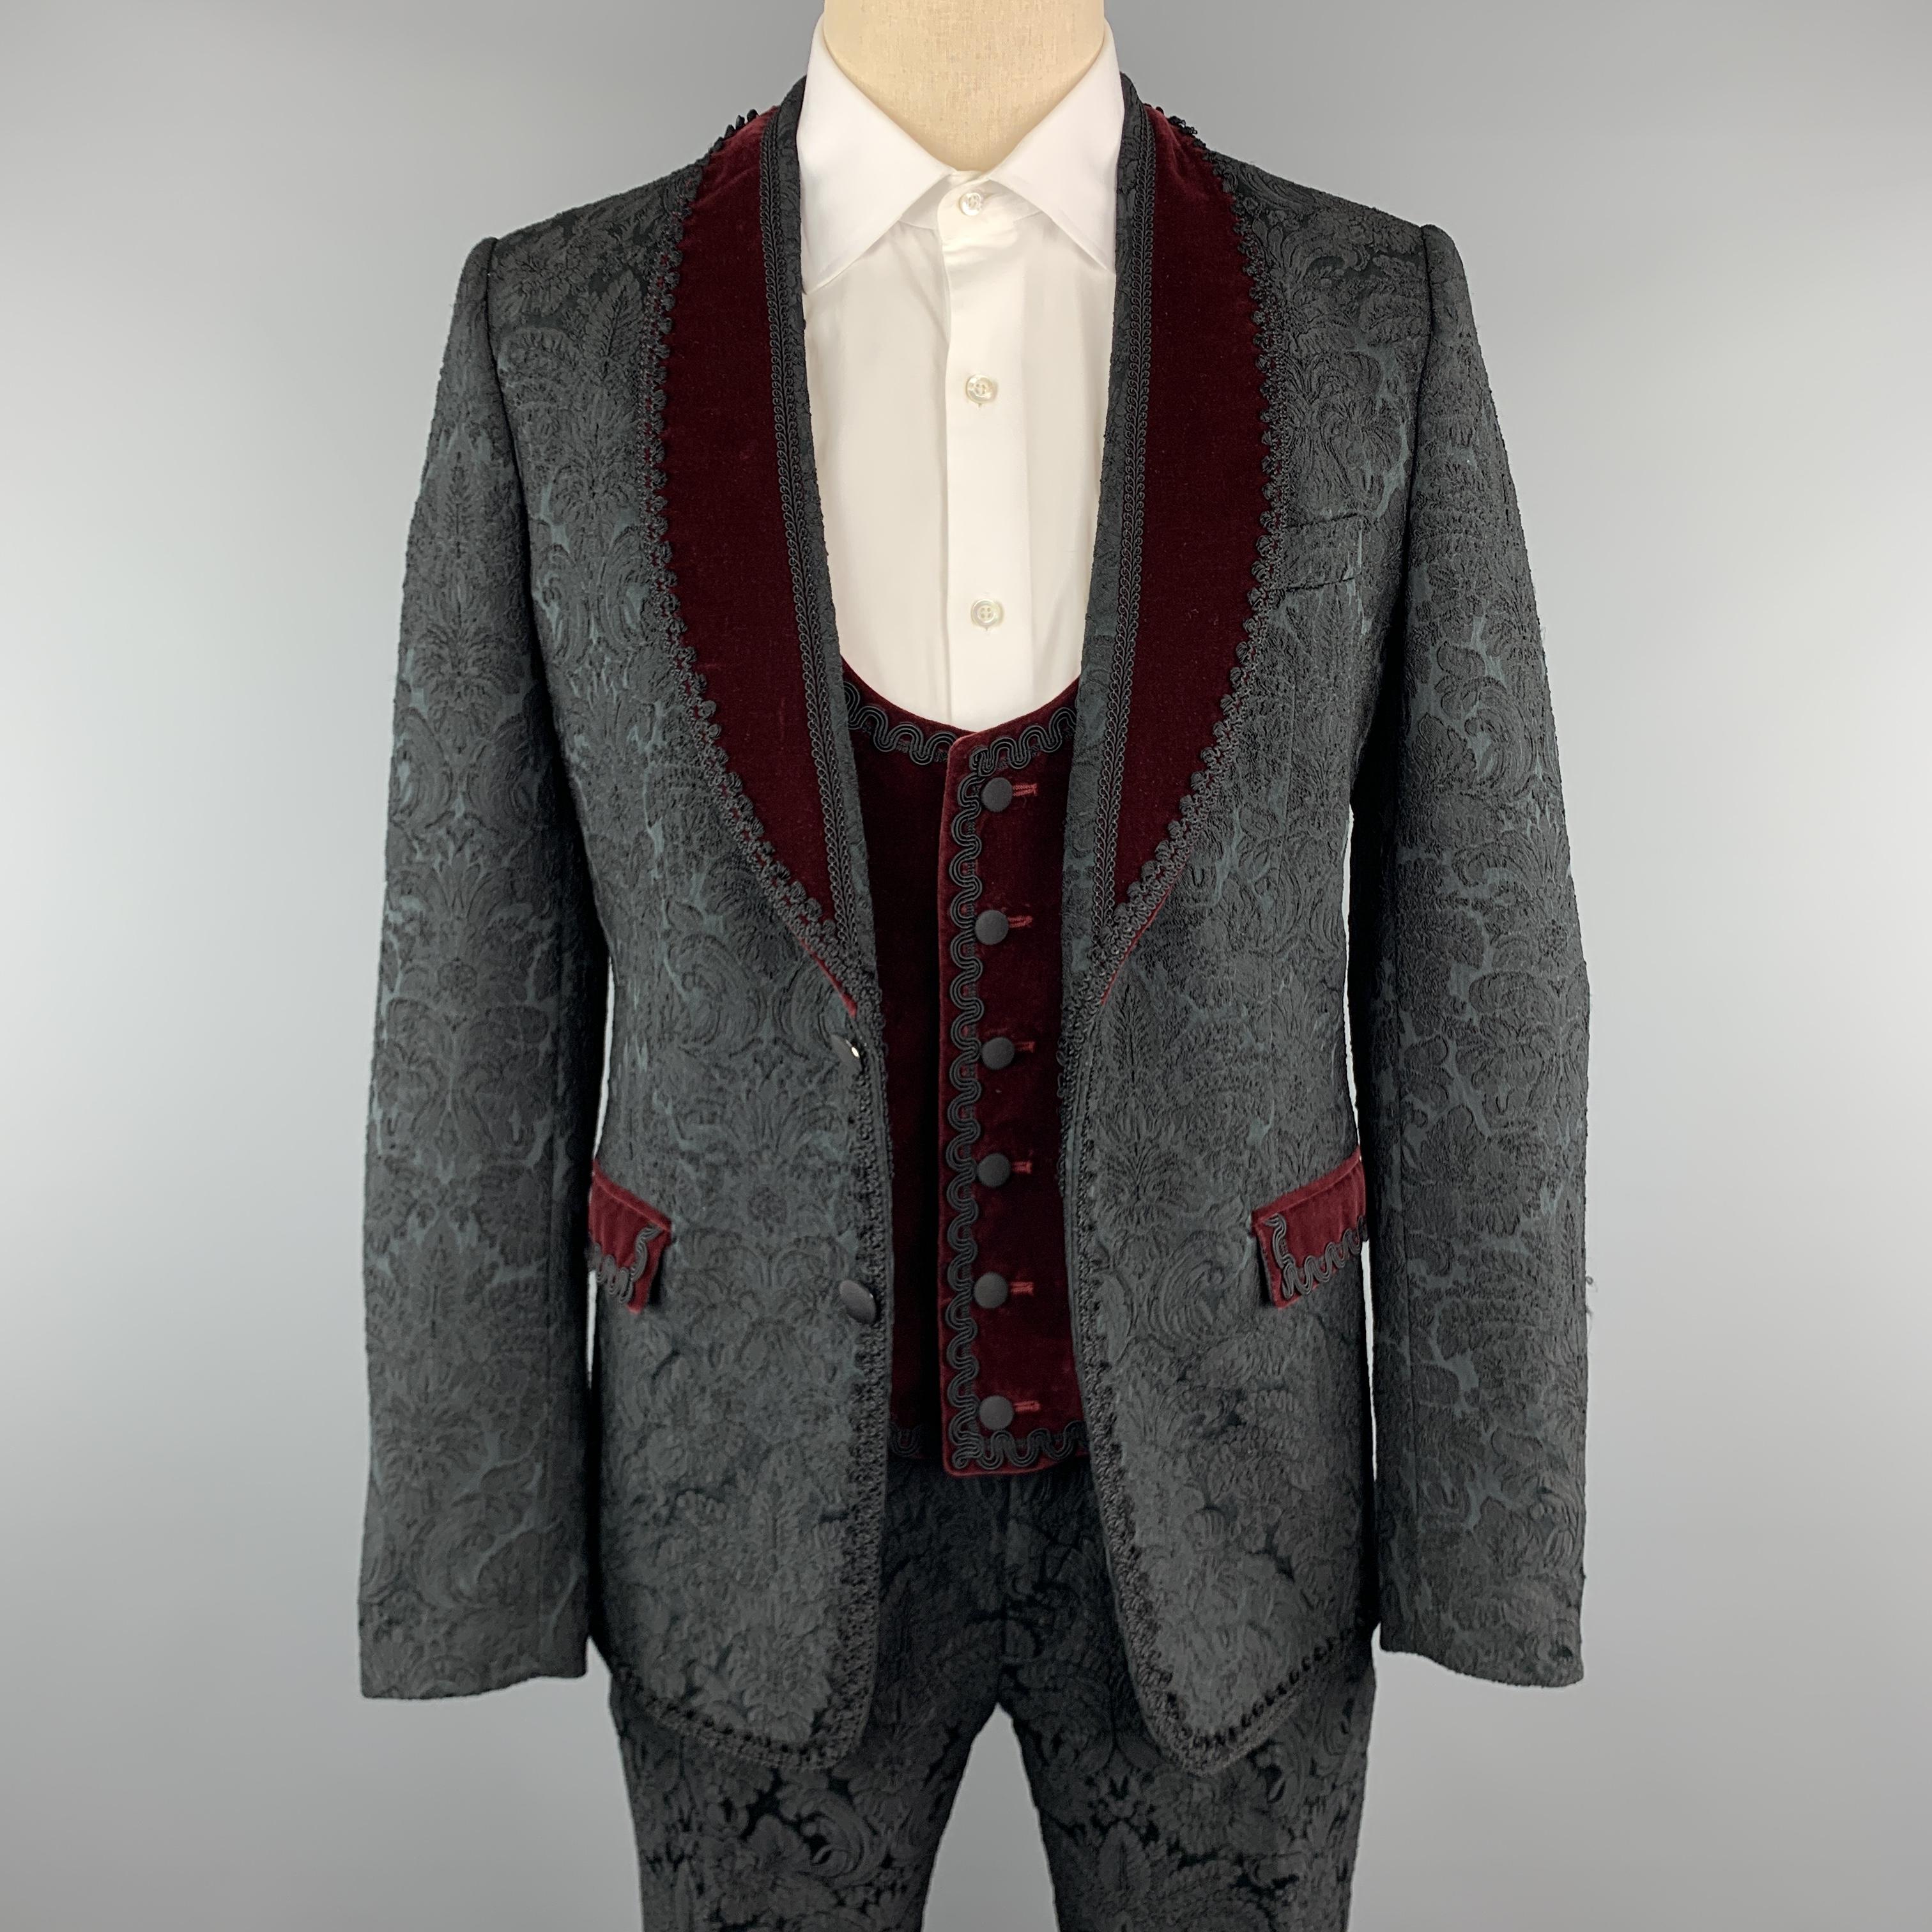 DOLCE & GABBANA three piece suit comes in black brocade fabric and includes a single breasted, two button dinner jacket with a burgundy velvet shawl collar, double vented back, and lace trim with a matching velvet vest and slim cut trousers. Made in